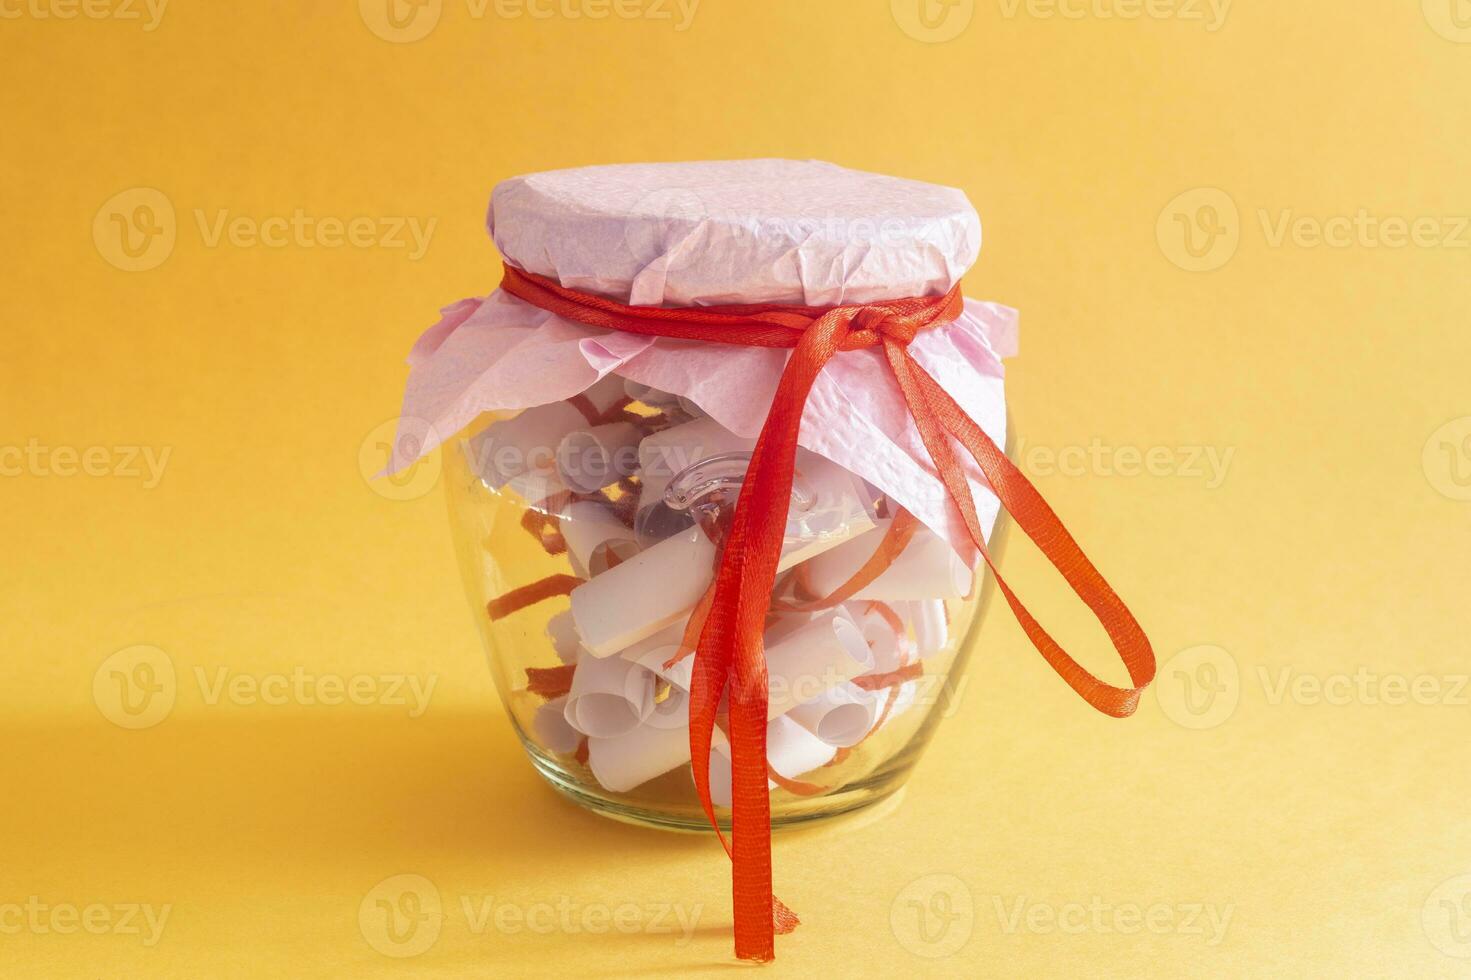 Desires, Wishes or Dreams written on rolled papers in glass jar on yellow photo